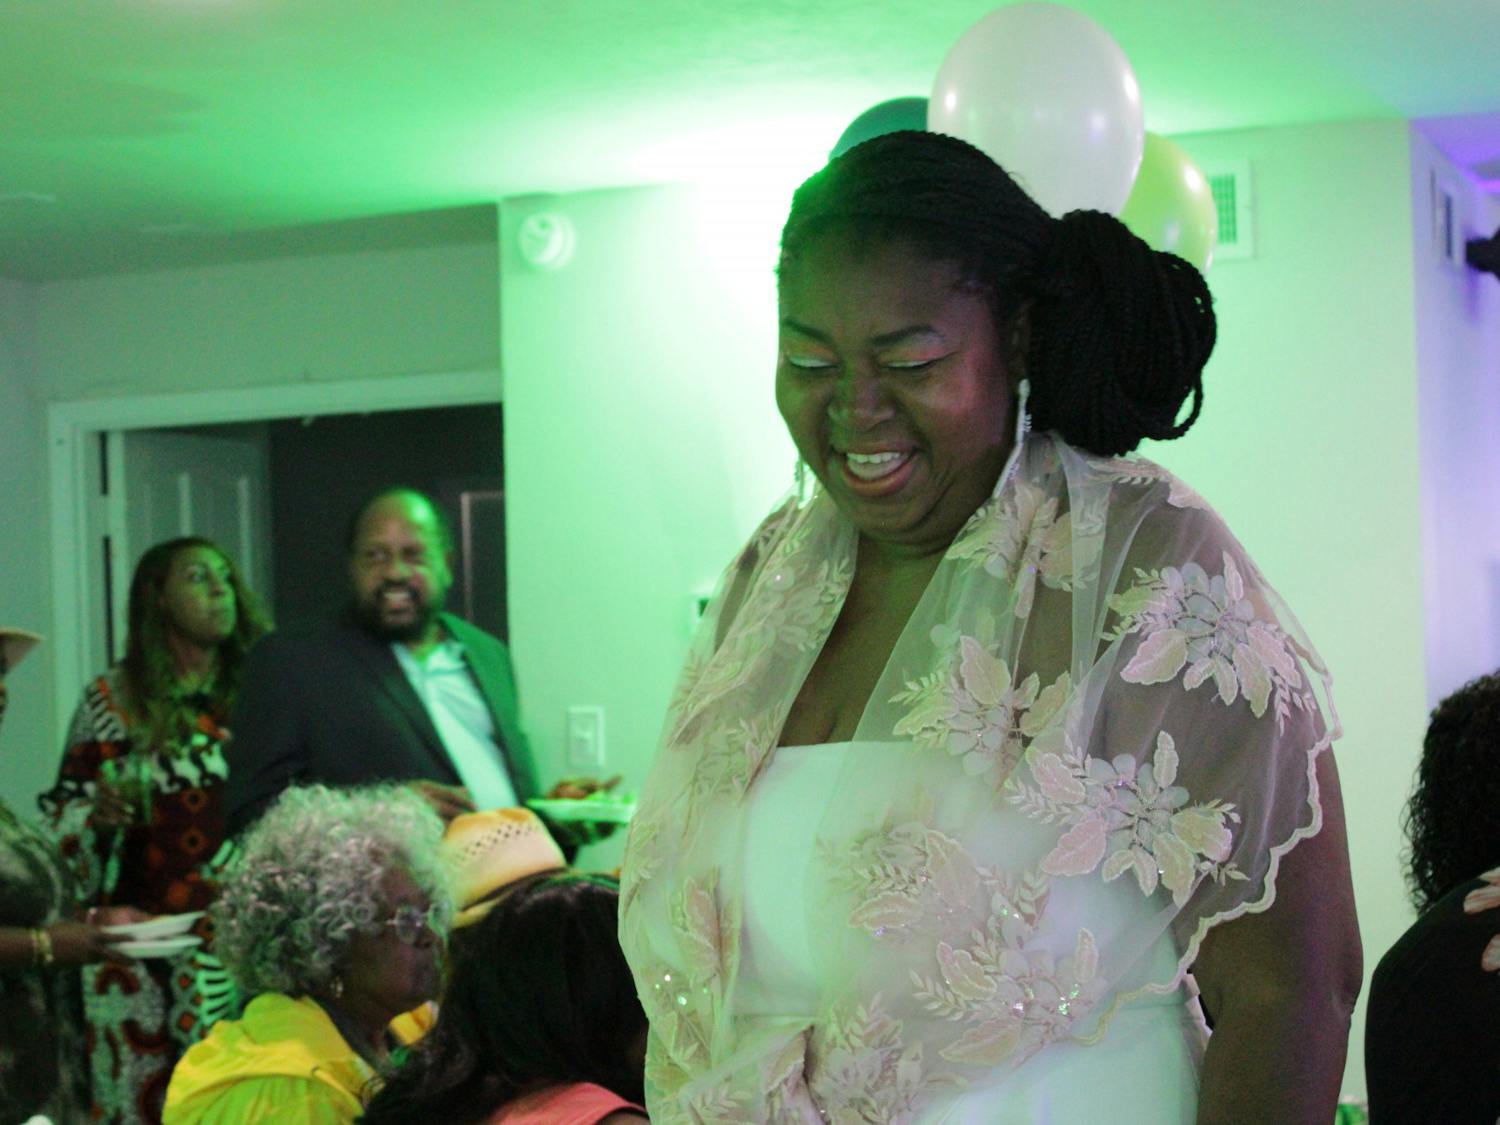 Diyonne McGraw, the District 2 School Board member-elect, celebrates her win
on Tuesday, Aug. 23. 2022. “I’m all about results when it comes to the children,”
she said. ”I have children and that's who I serve. I want to see them become
ambassadors and agents of change.”